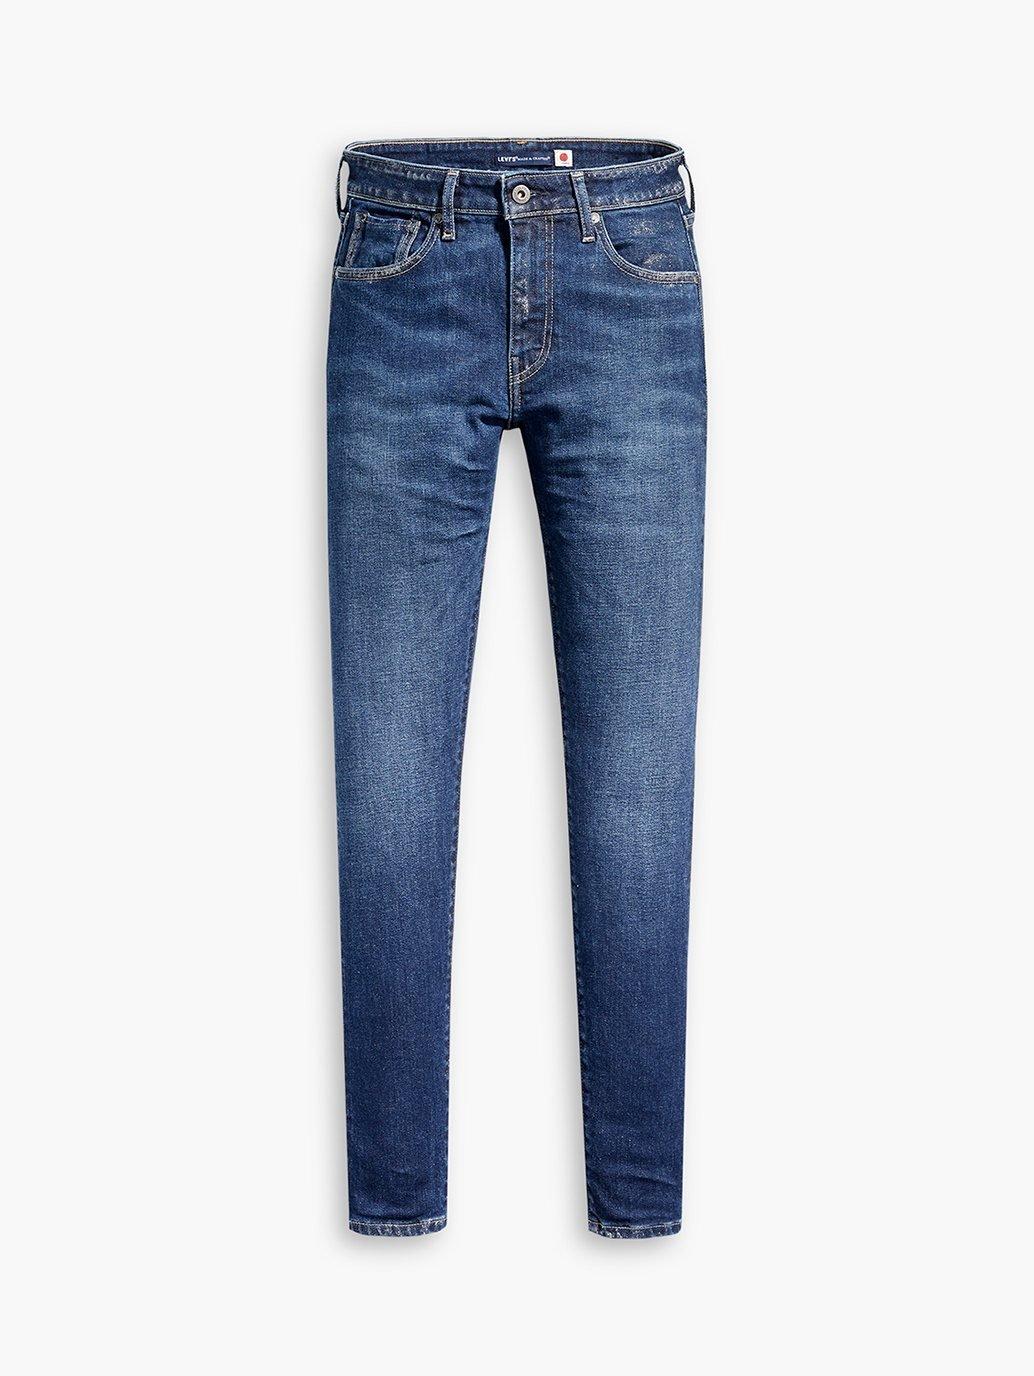 Levi's® MY Made & Crafted® 721 High Rise Skinny Jeans for Women - 678790015